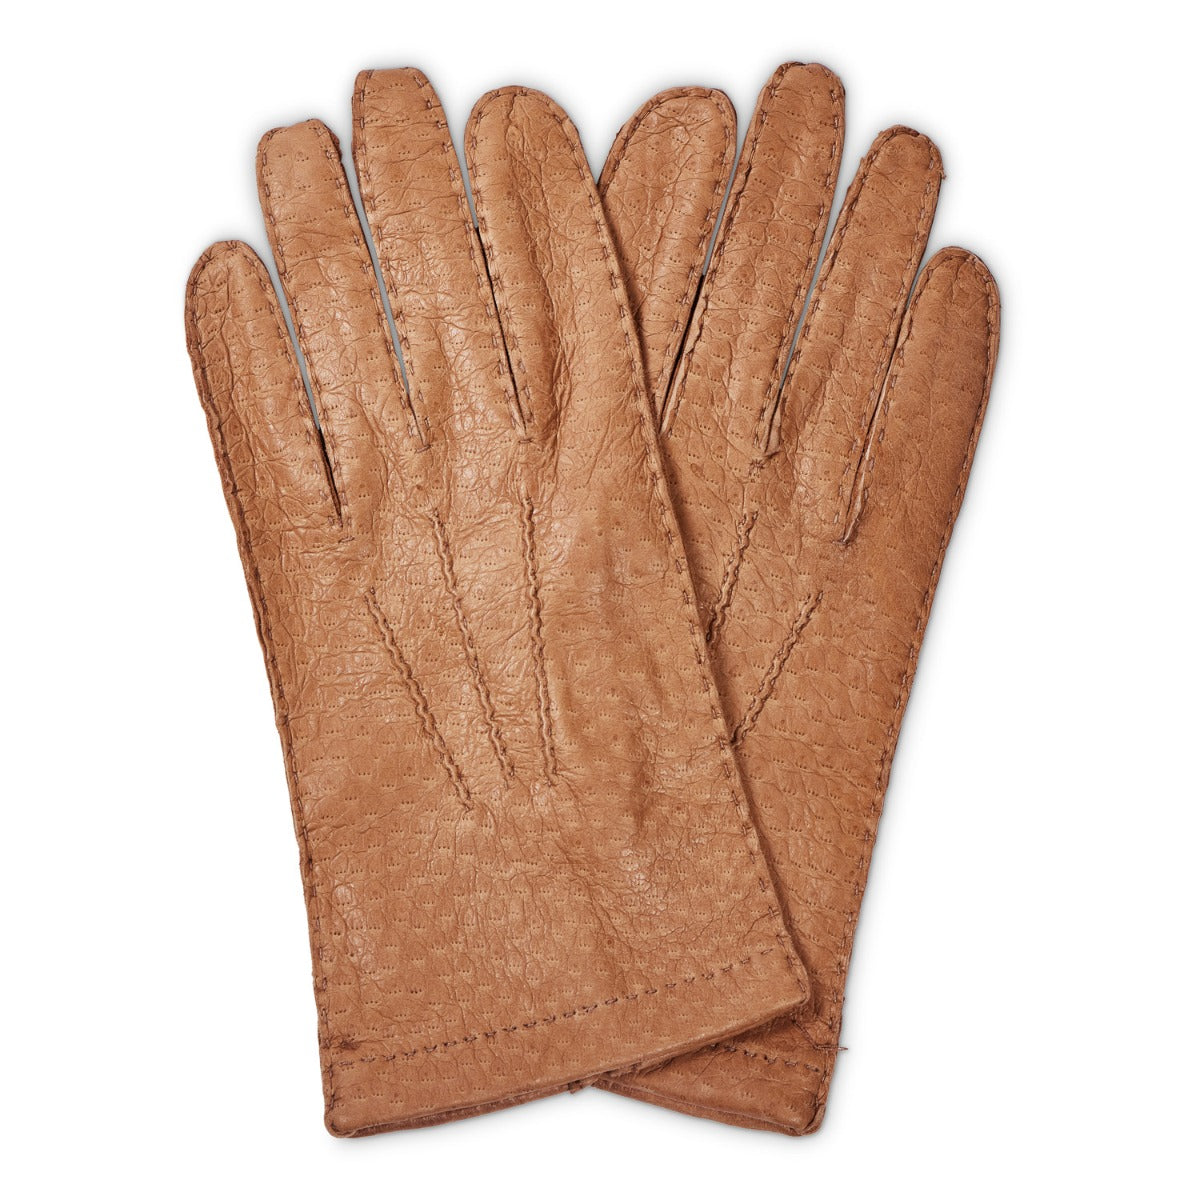 Sovereign Grade Light Brown Peccary Leather Gloves, Unlined